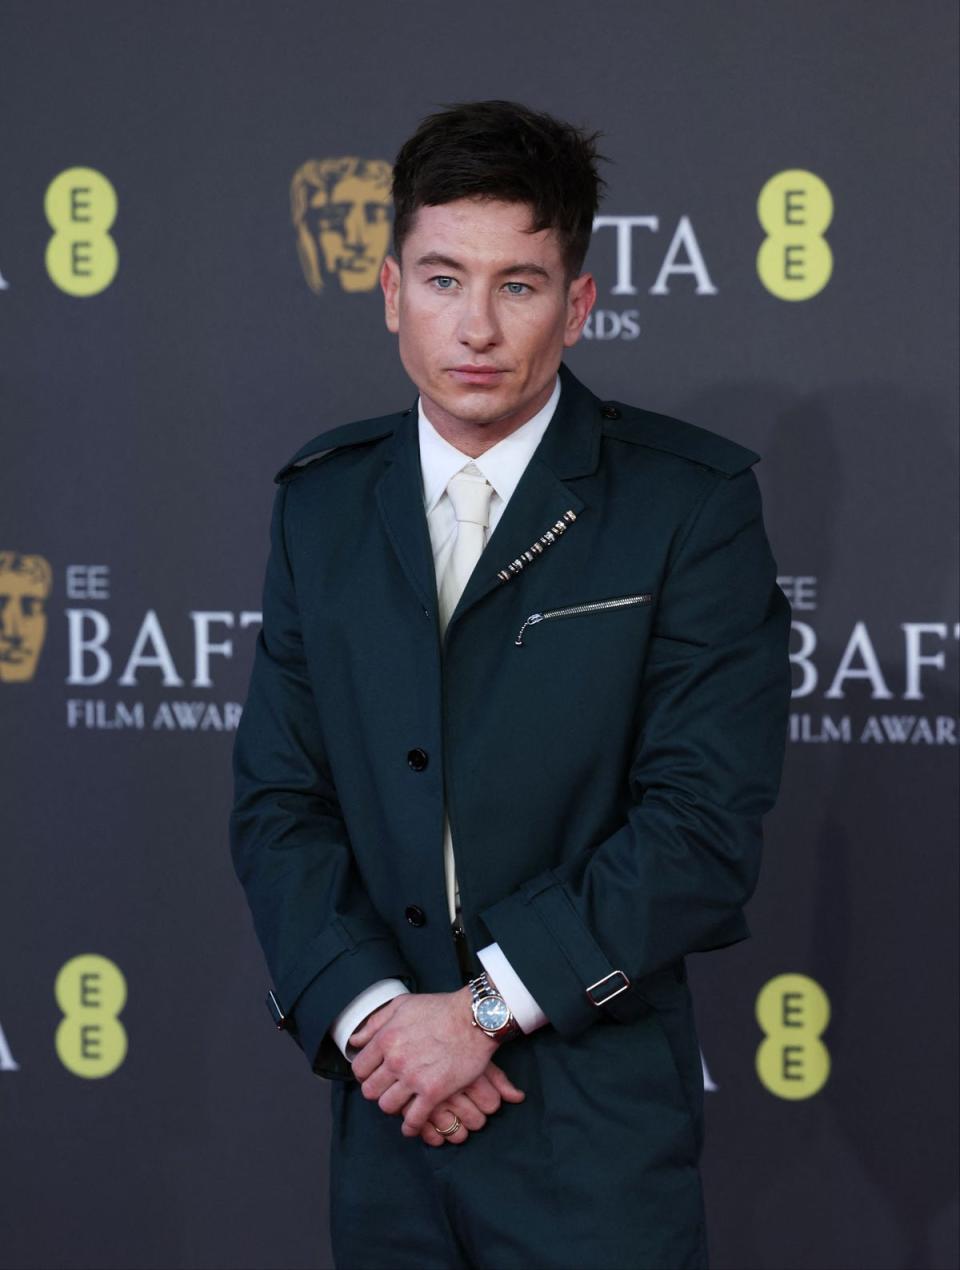 Keoghan pictured at the event (REUTERS)